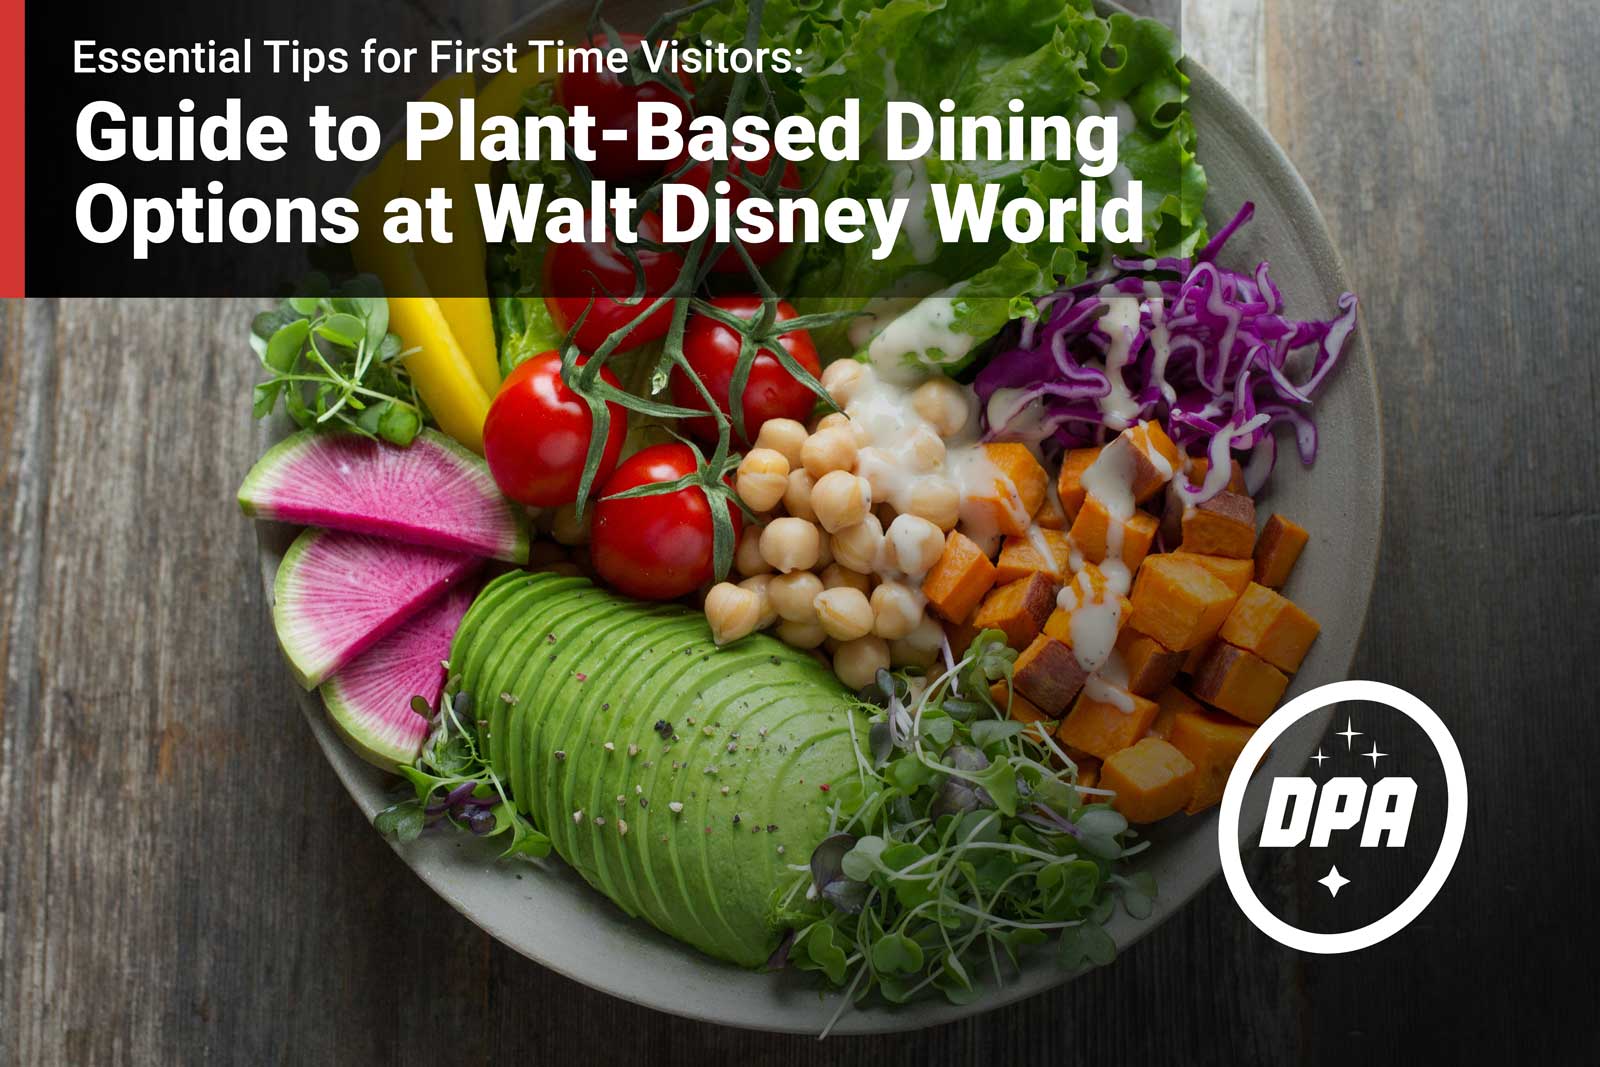 Guide to Plant-Based Dining Options at Walt Disney World